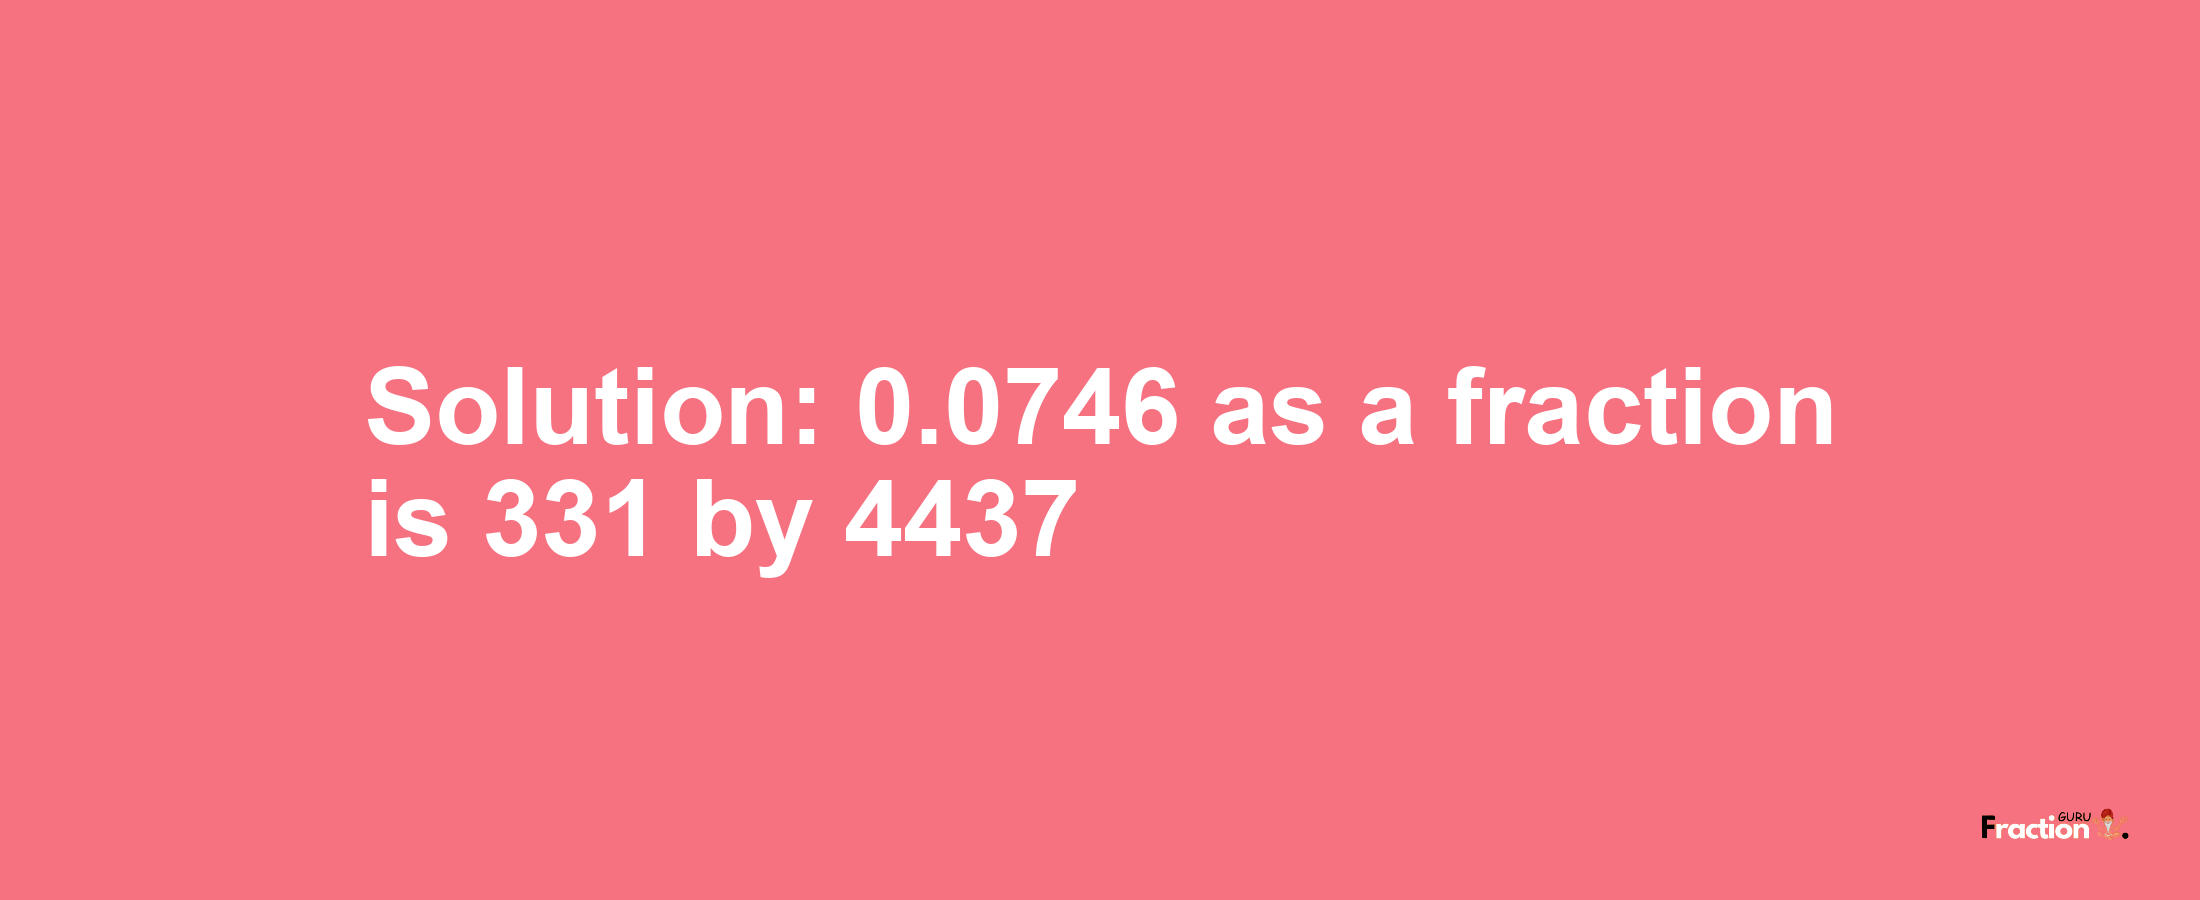 Solution:0.0746 as a fraction is 331/4437